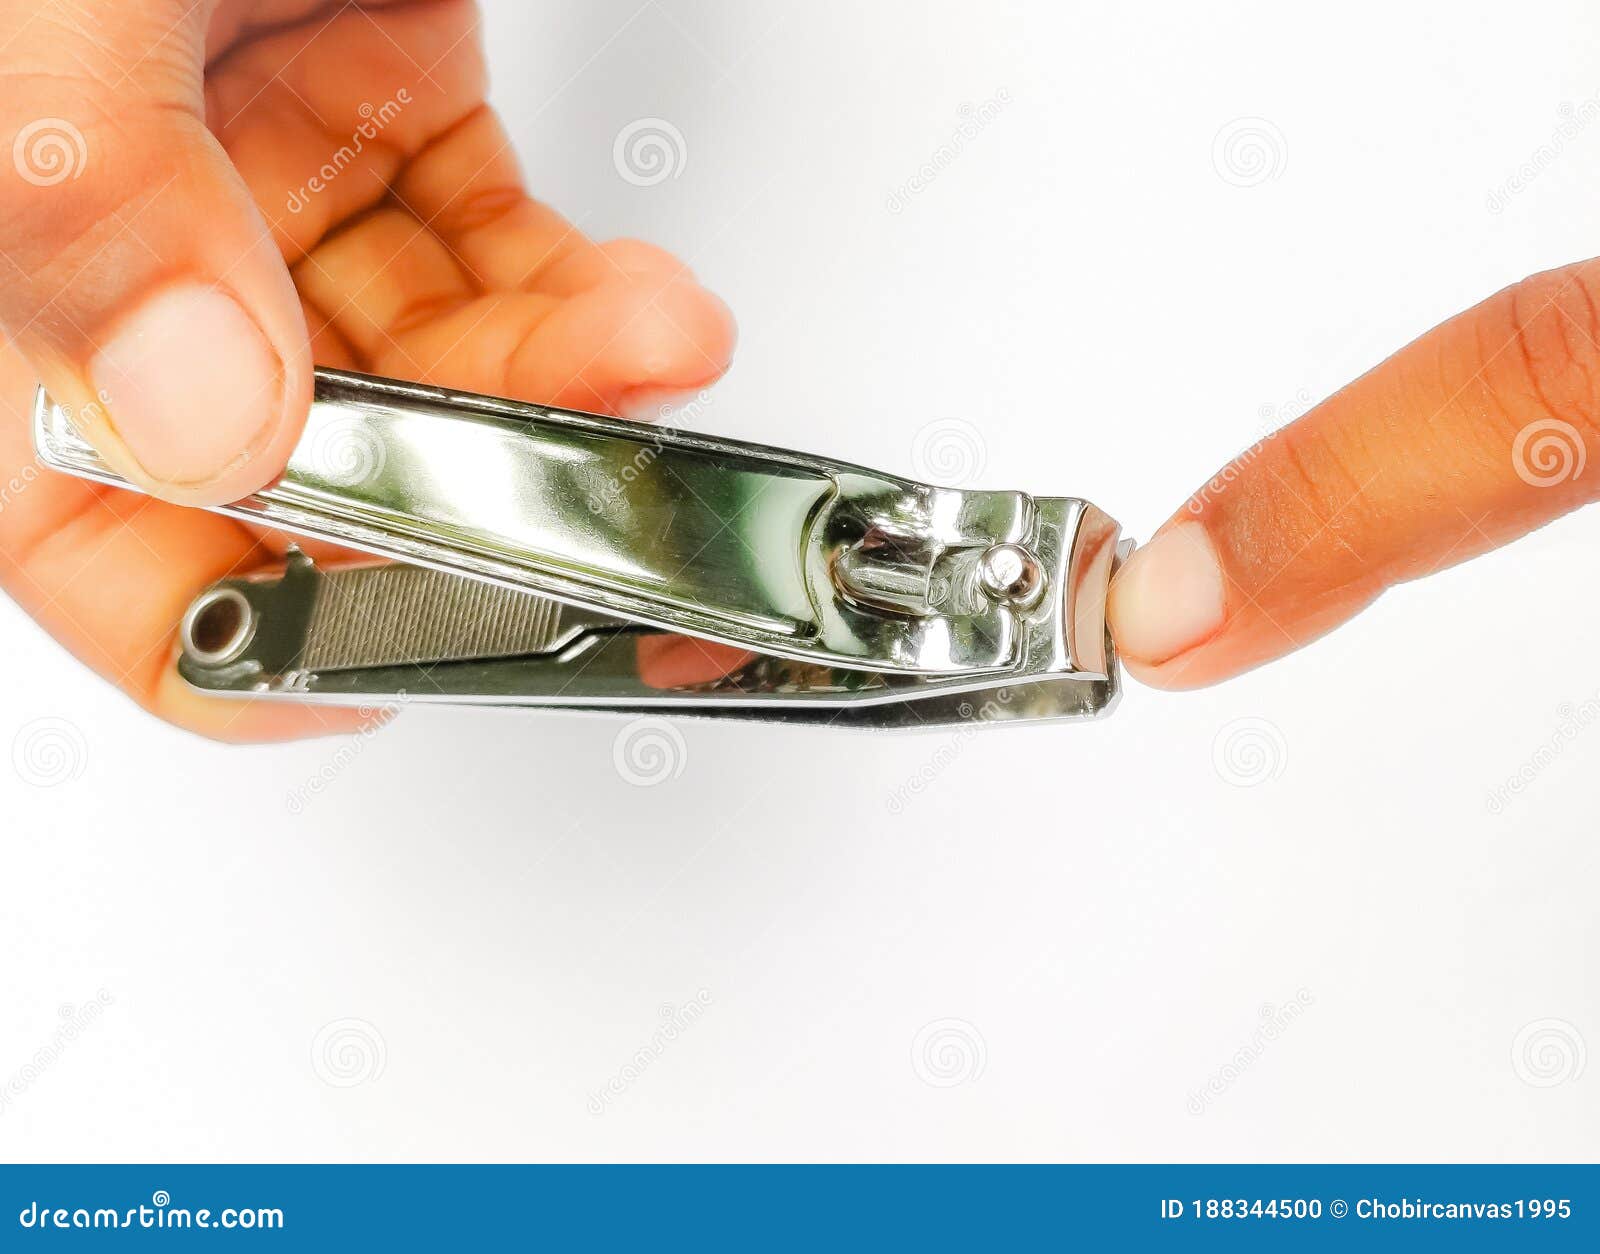 Trim Your Nails Regularly Cartoon Vector Stock Vector (Royalty Free)  2165236715 | Shutterstock